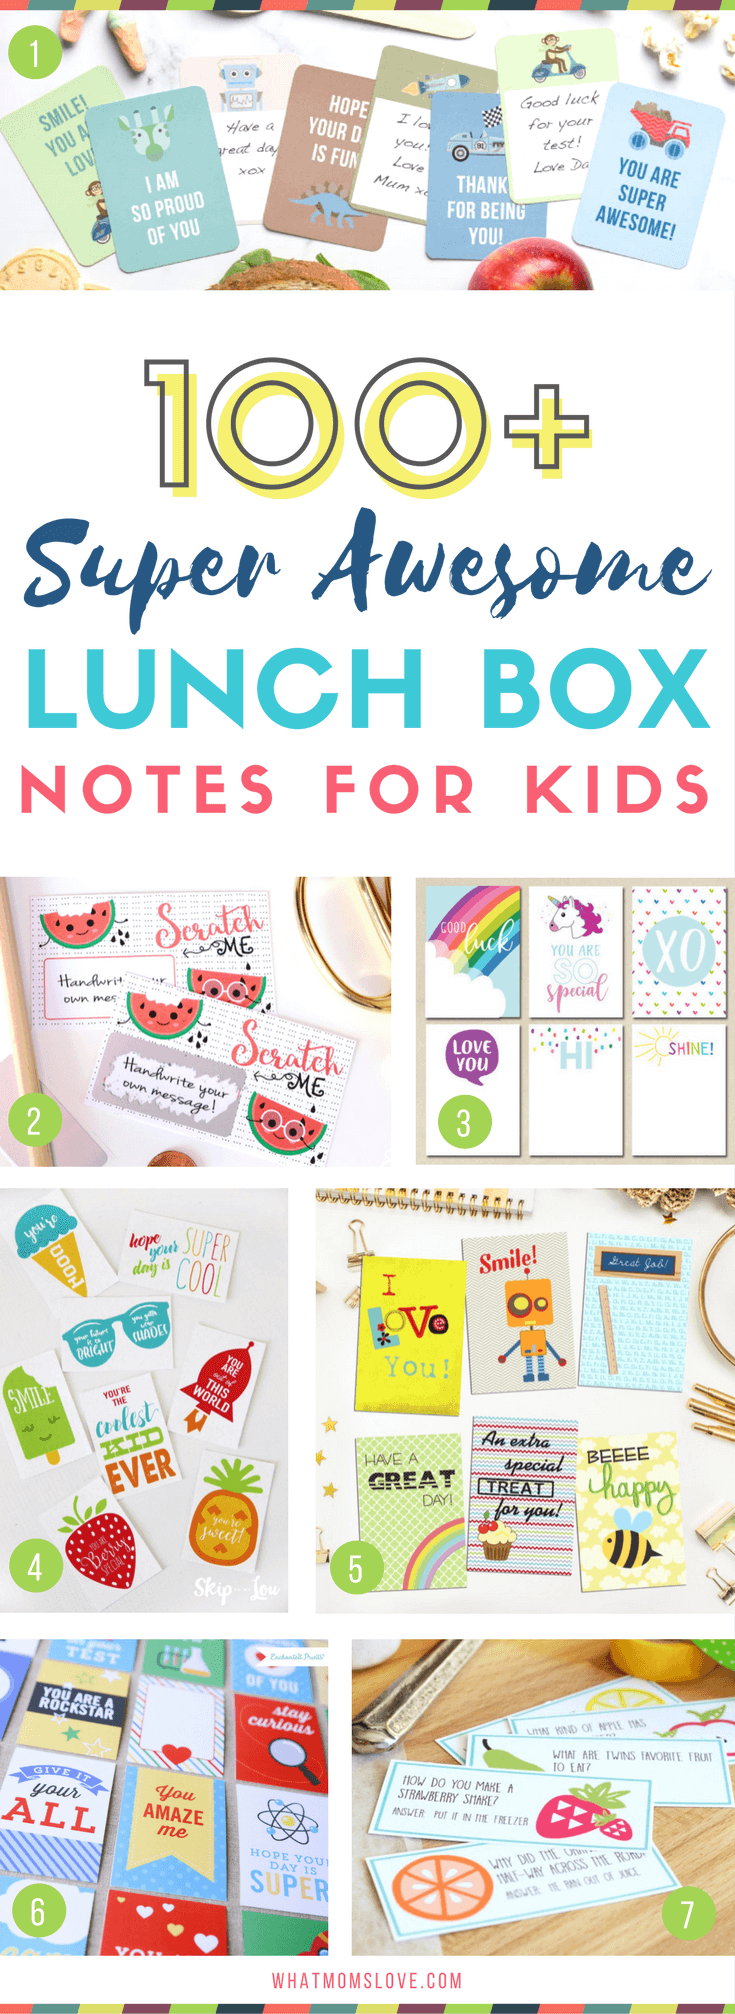 Lunch box notes for kids | Funny jokes and encouragement for girls and boys, kindergarten to teens | Many are free lunch note printables!